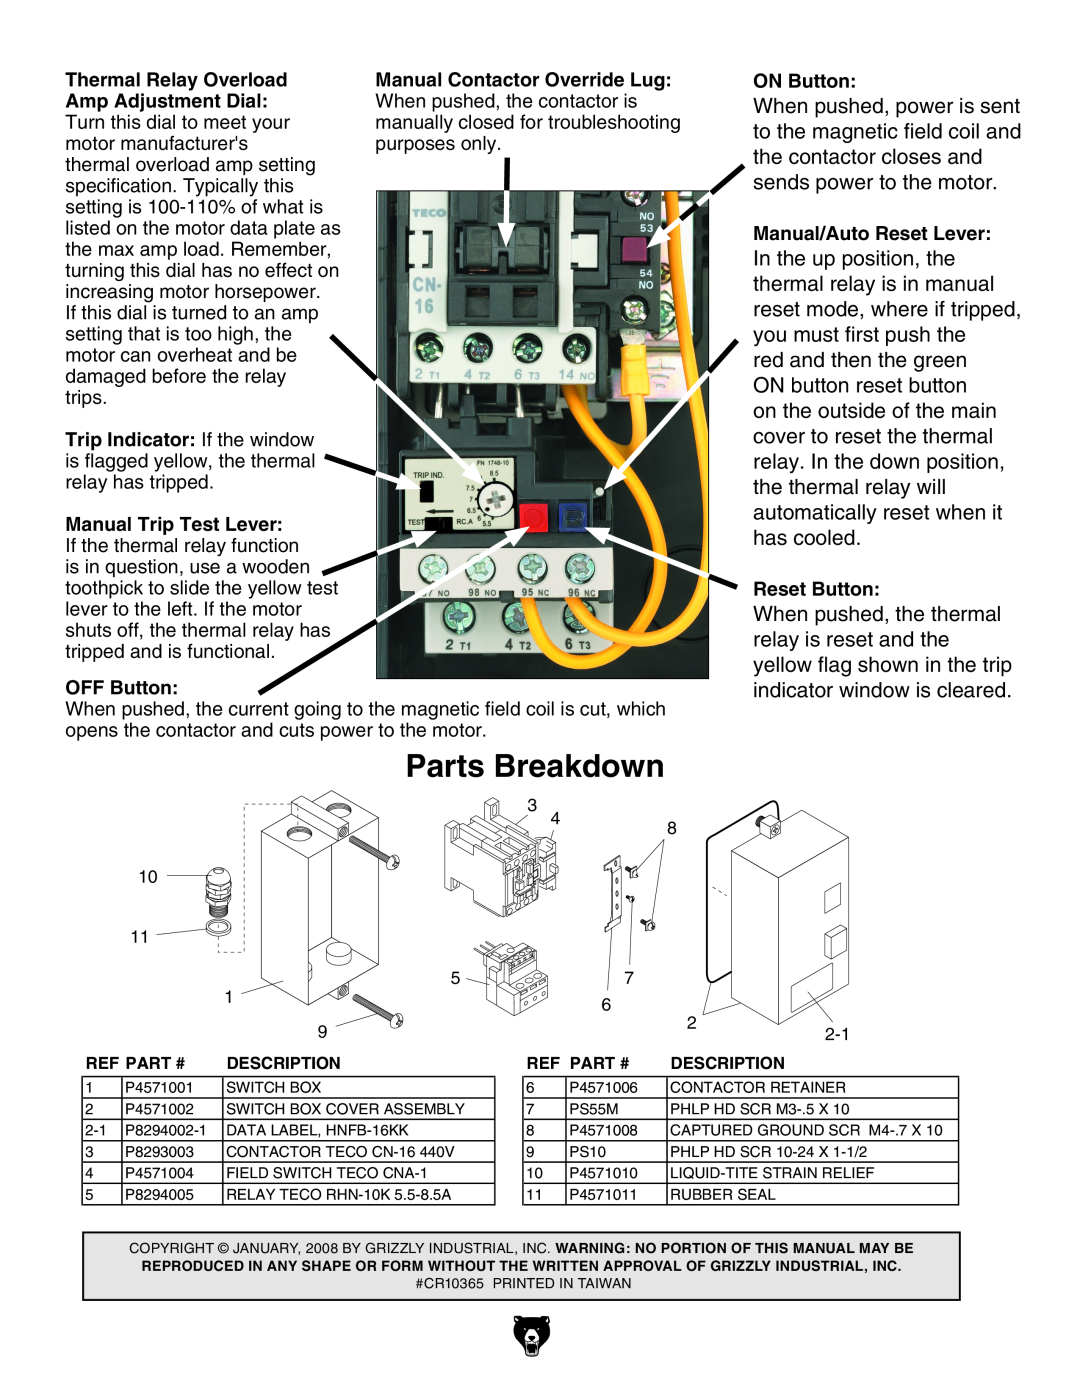 Grizzly G8294 instruction sheet Parts Breakdown 